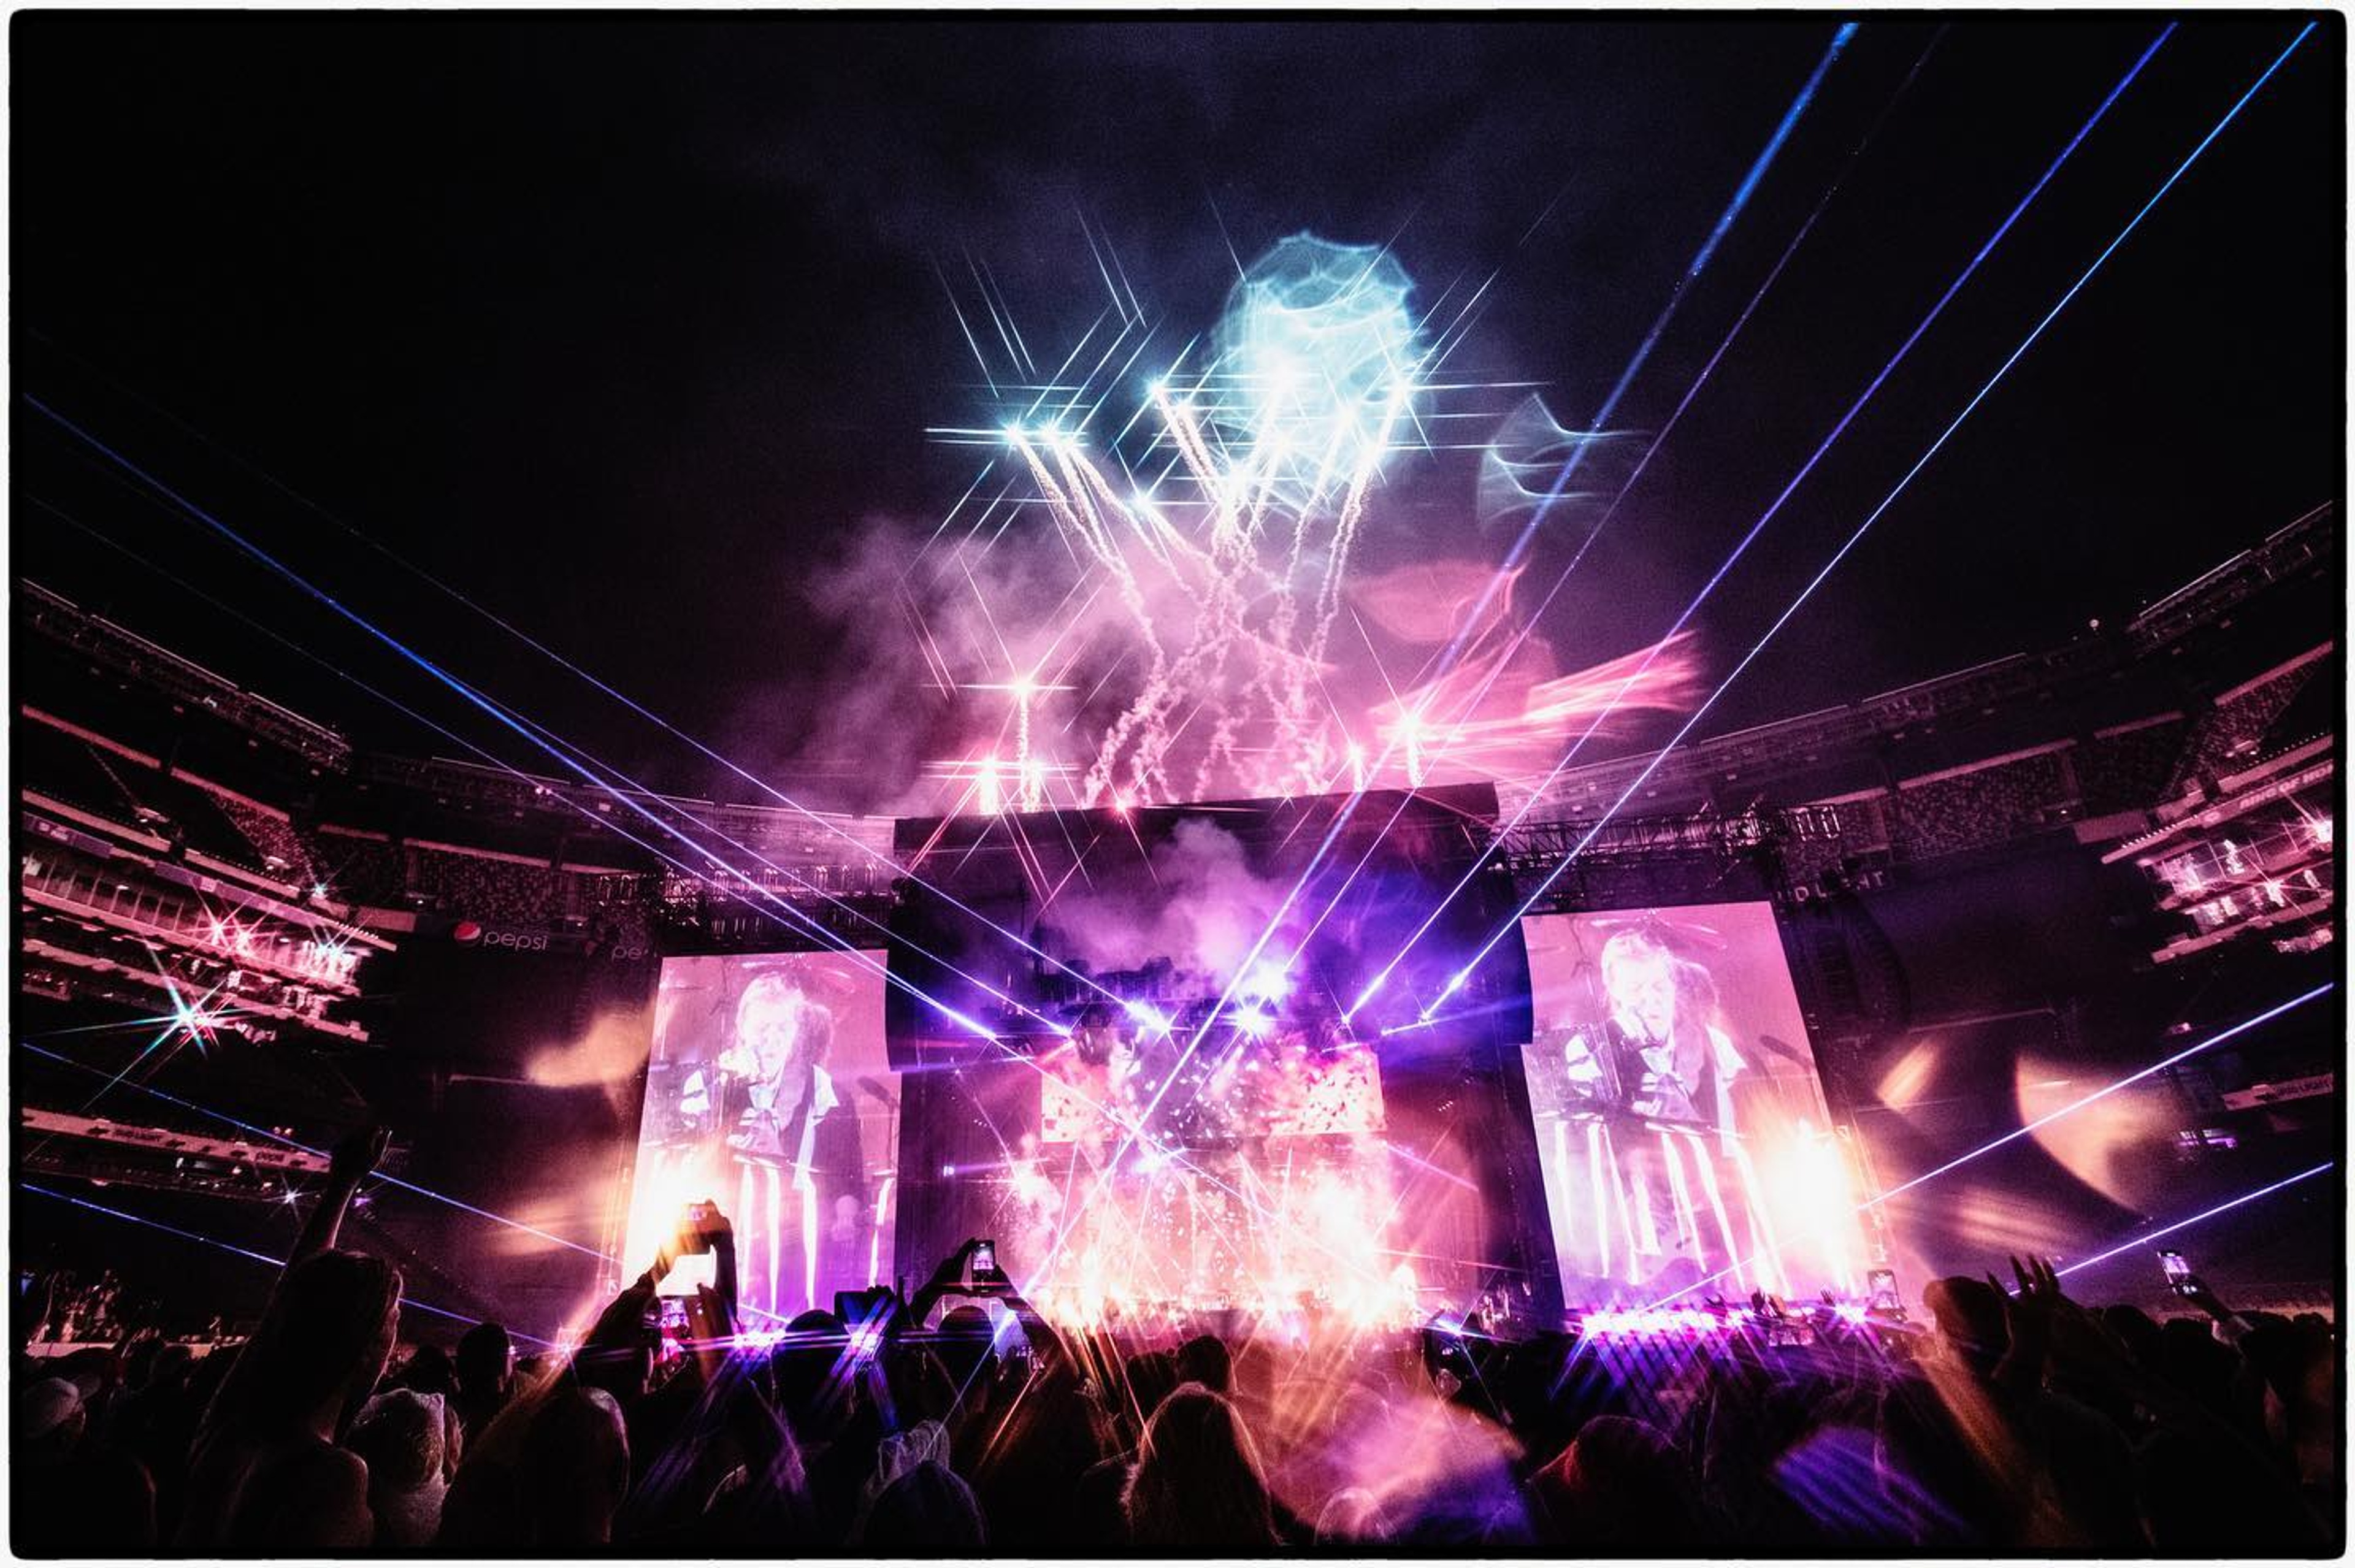 Photo of the GOT BACK tour stage, with explosions and lasers during Paul McCartney's set at MetLife Stadium in East Rutherford, New Jersey